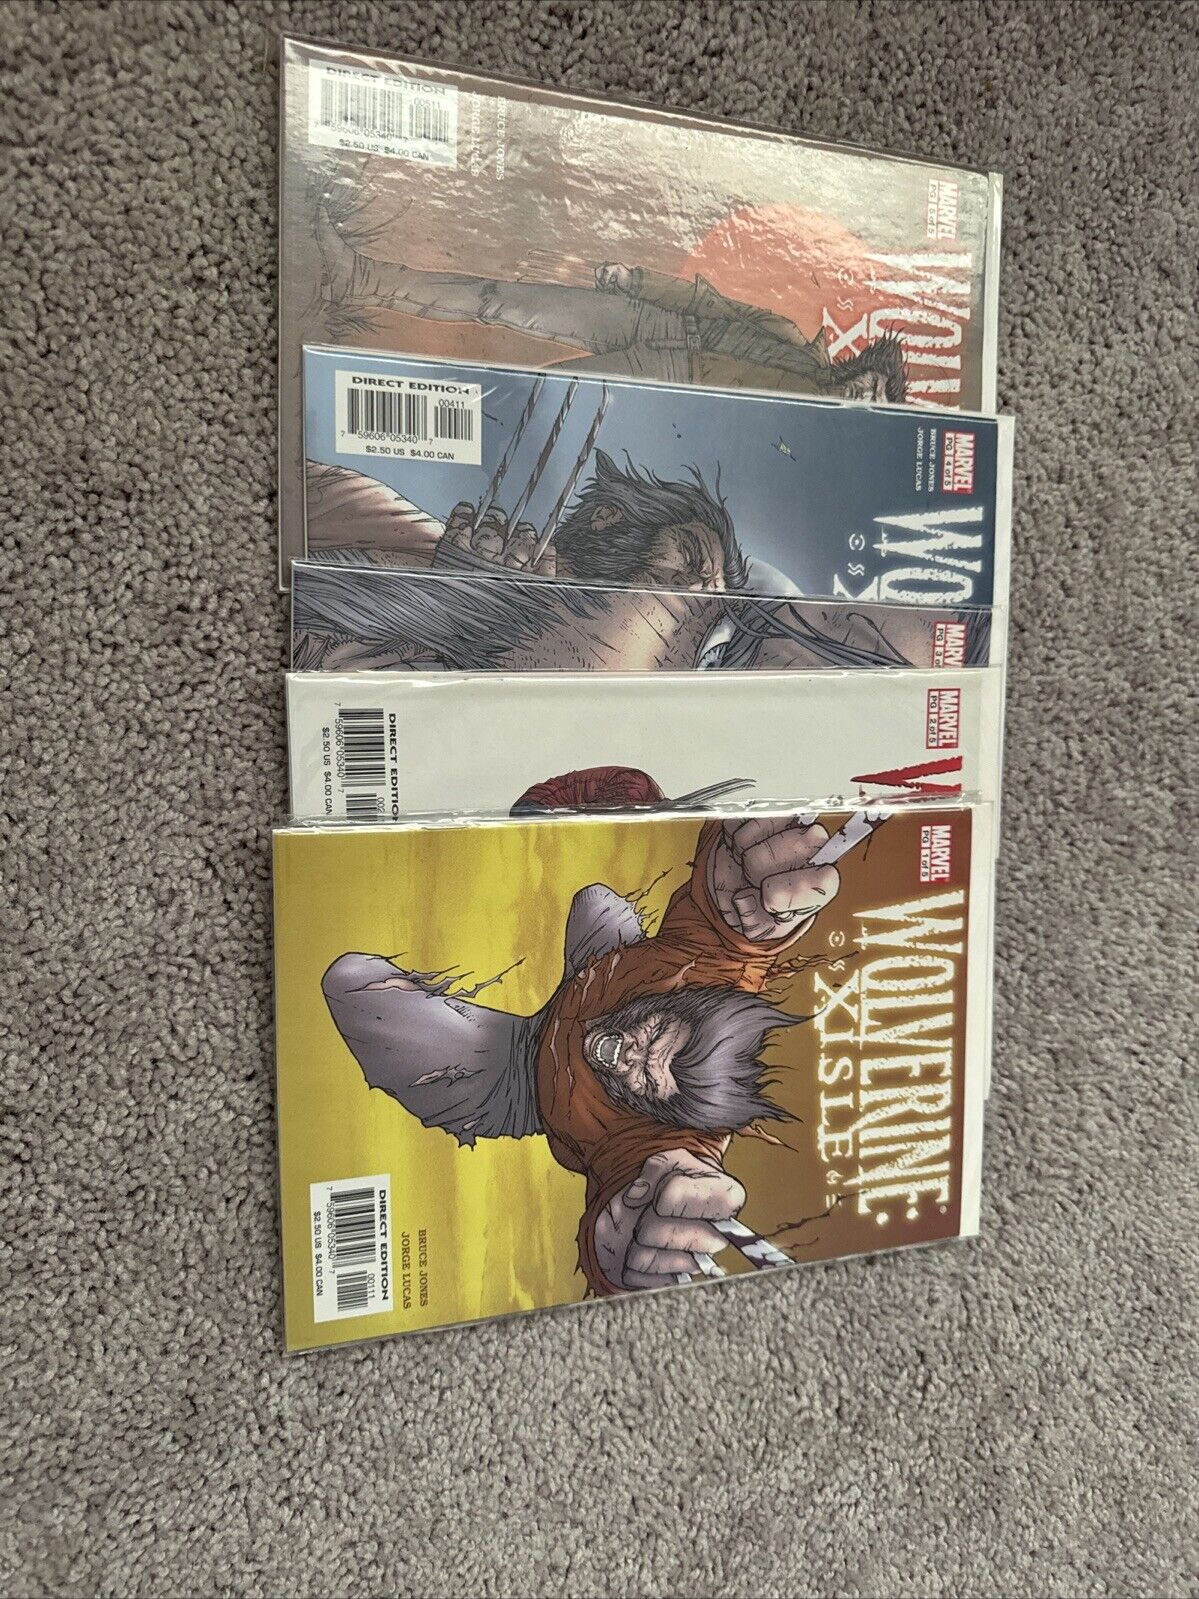 Wolverine Xisle #1-5 - Path of the Warlord #1